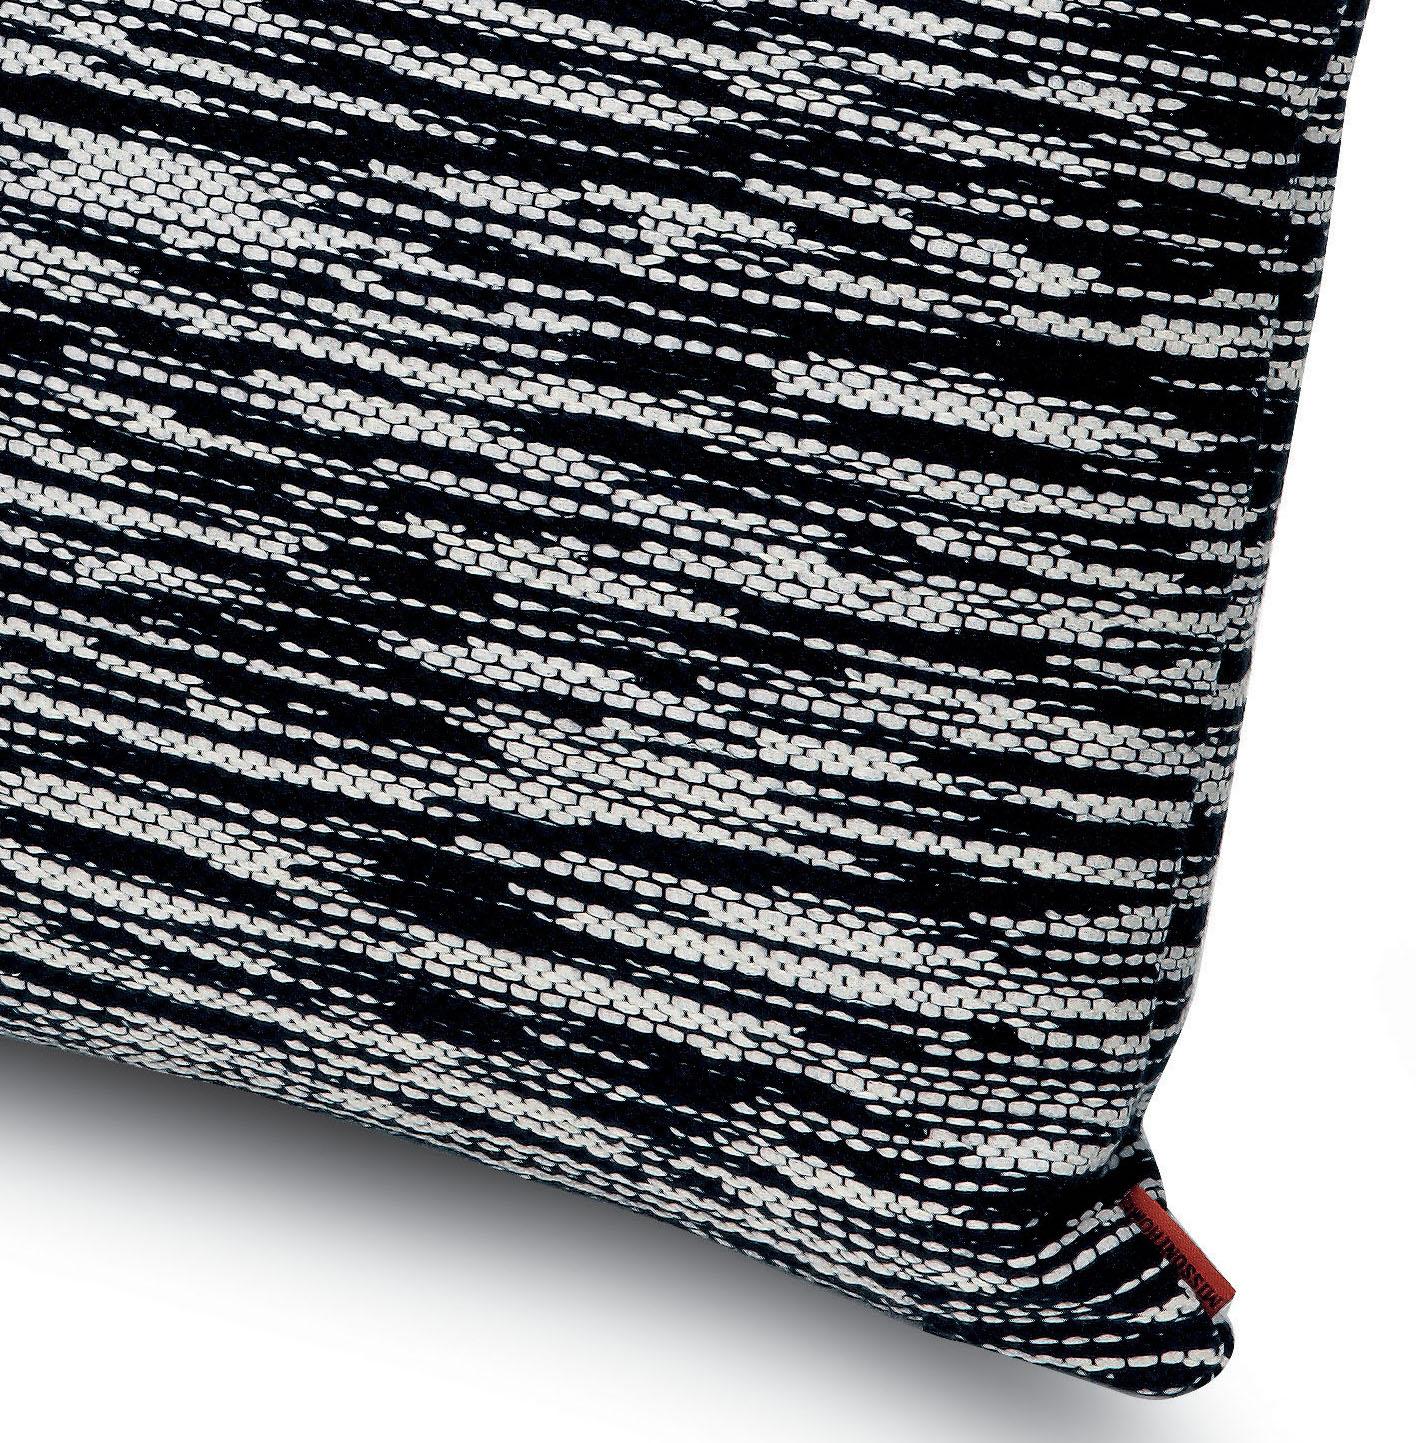 Woven black and white flame pattern by MissoniHome. 

Composition: 100% Cotton. Care: delicate dry-clean with perchlorethylene. Perfect for adding an elegant touch to any bedroom or living room.

